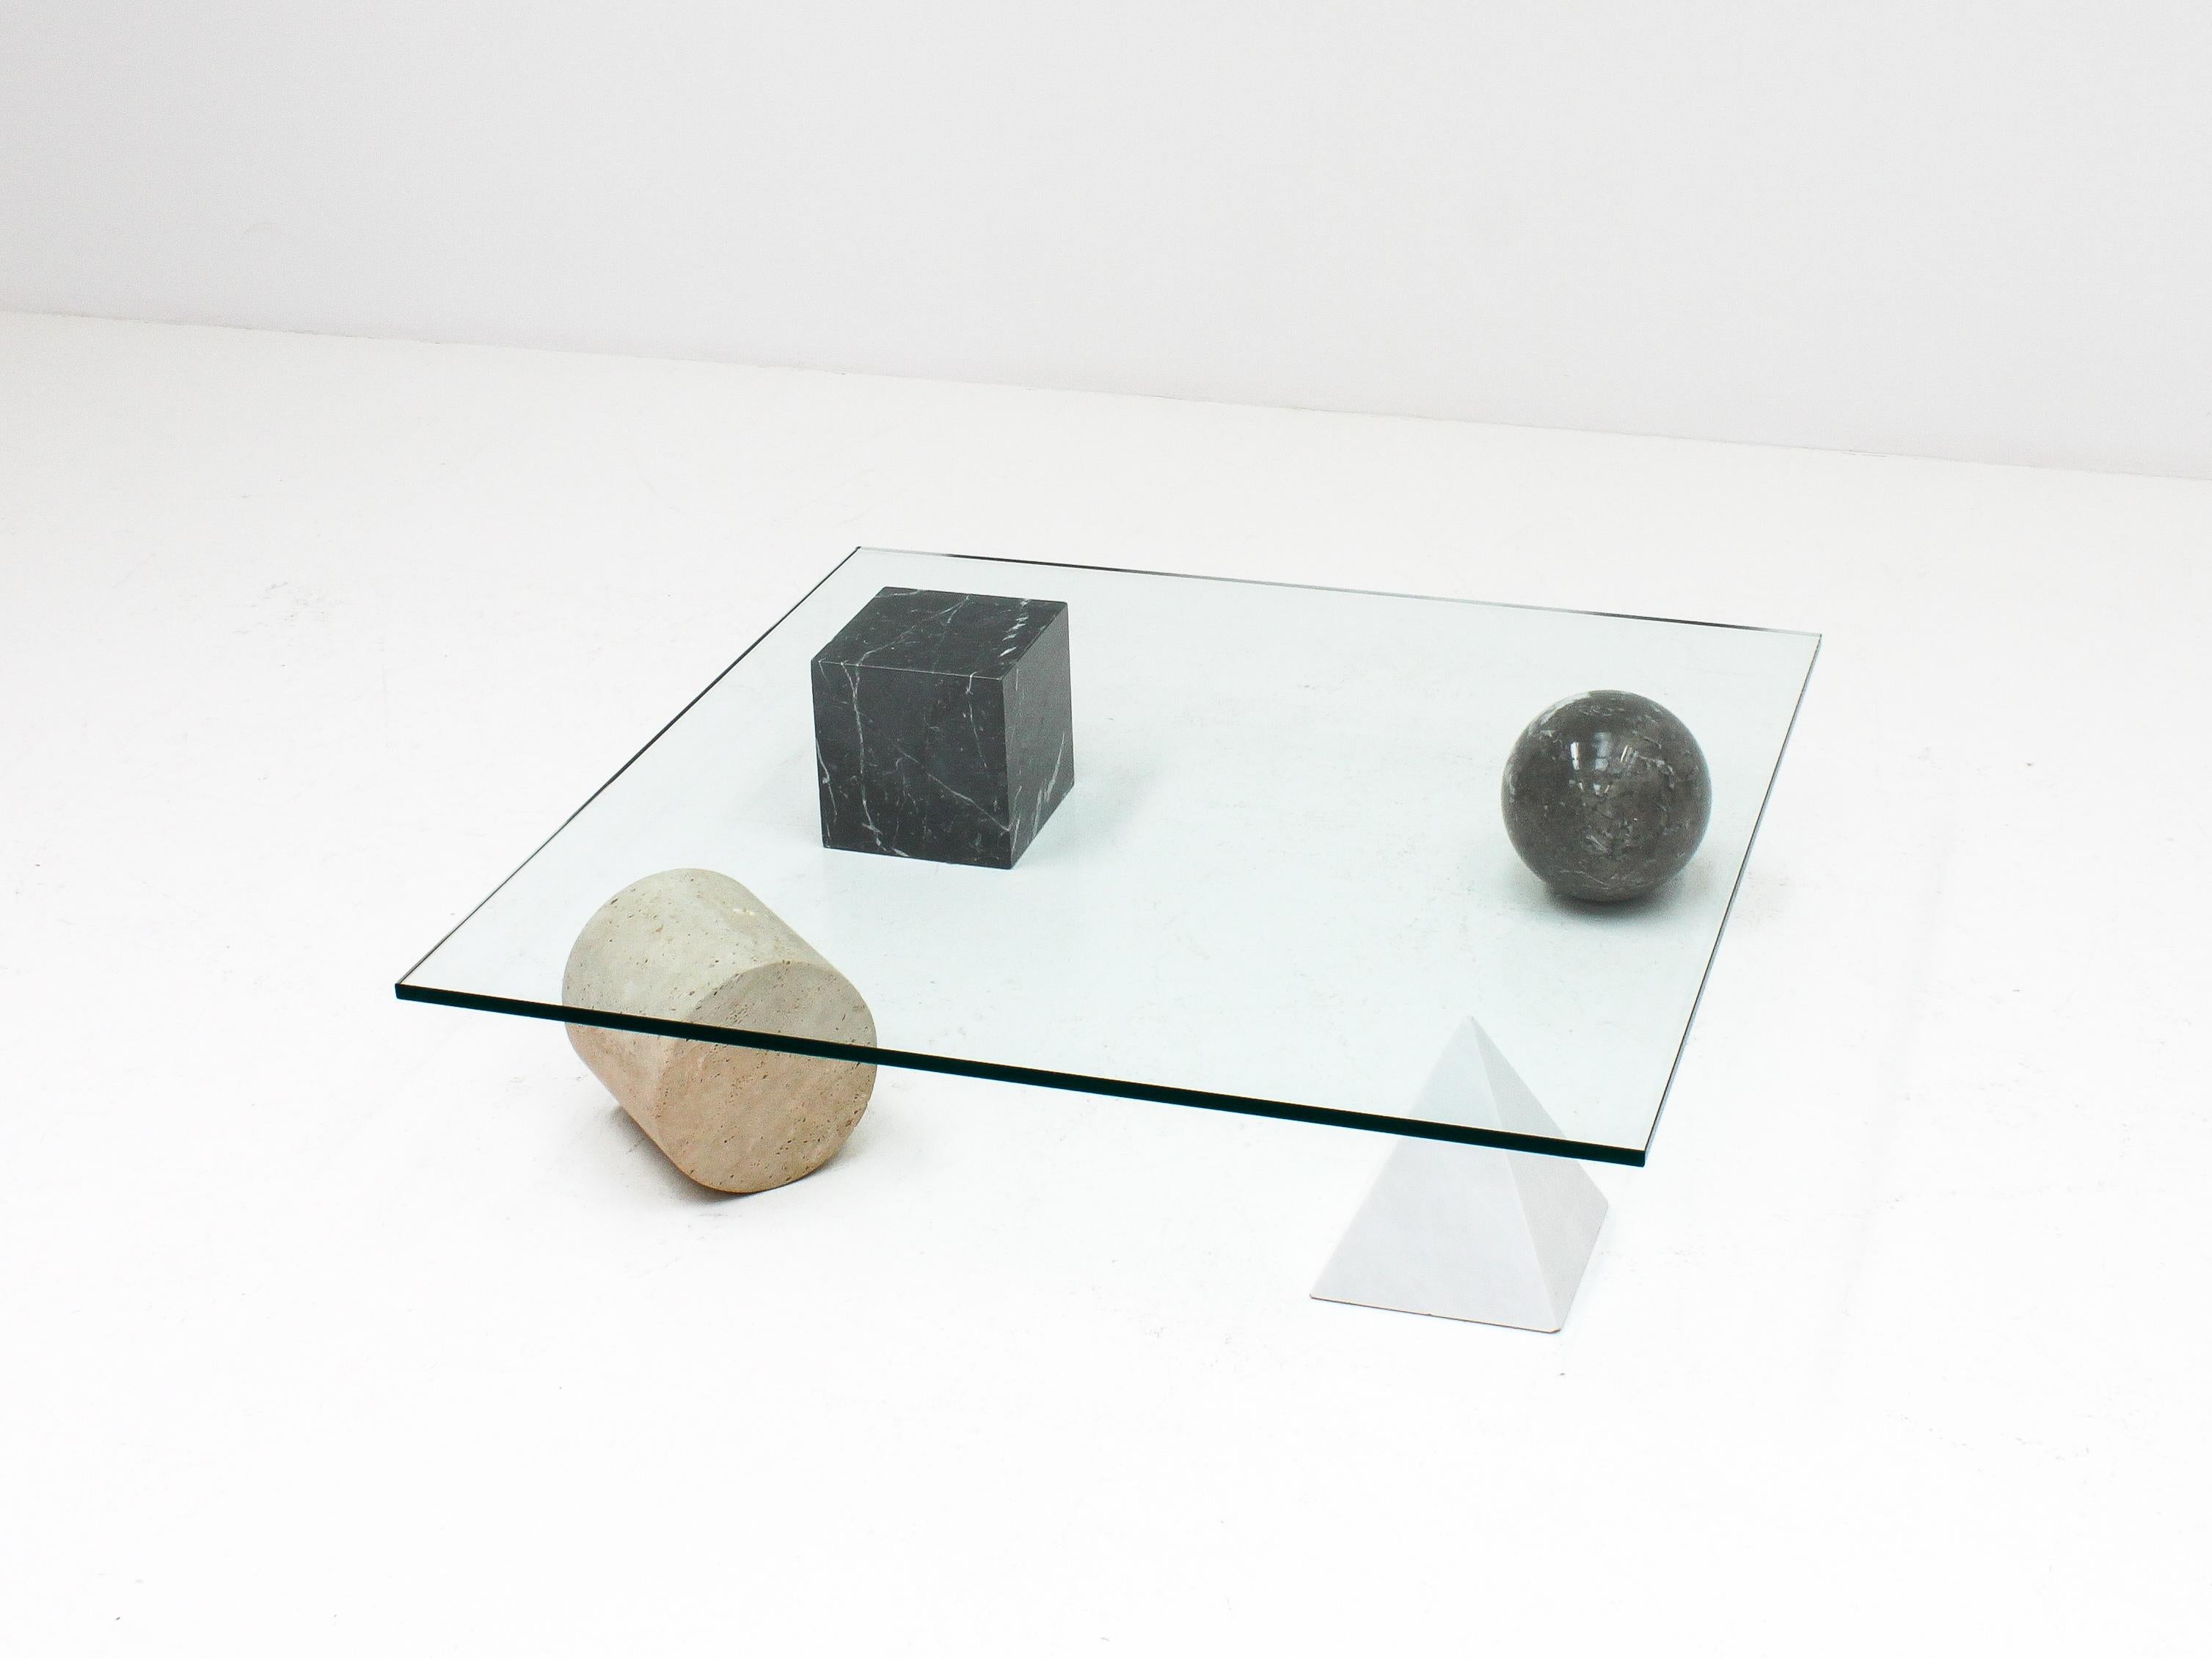 A ‘Metafora’ coffee table by Massimo and Lella Vignelli for Casigliani, Italy. 

Constructed of four geometric marble shapes which form the base including a solid Carrara marble pyramid, travertine cylinder, black marble block and granite sphere and